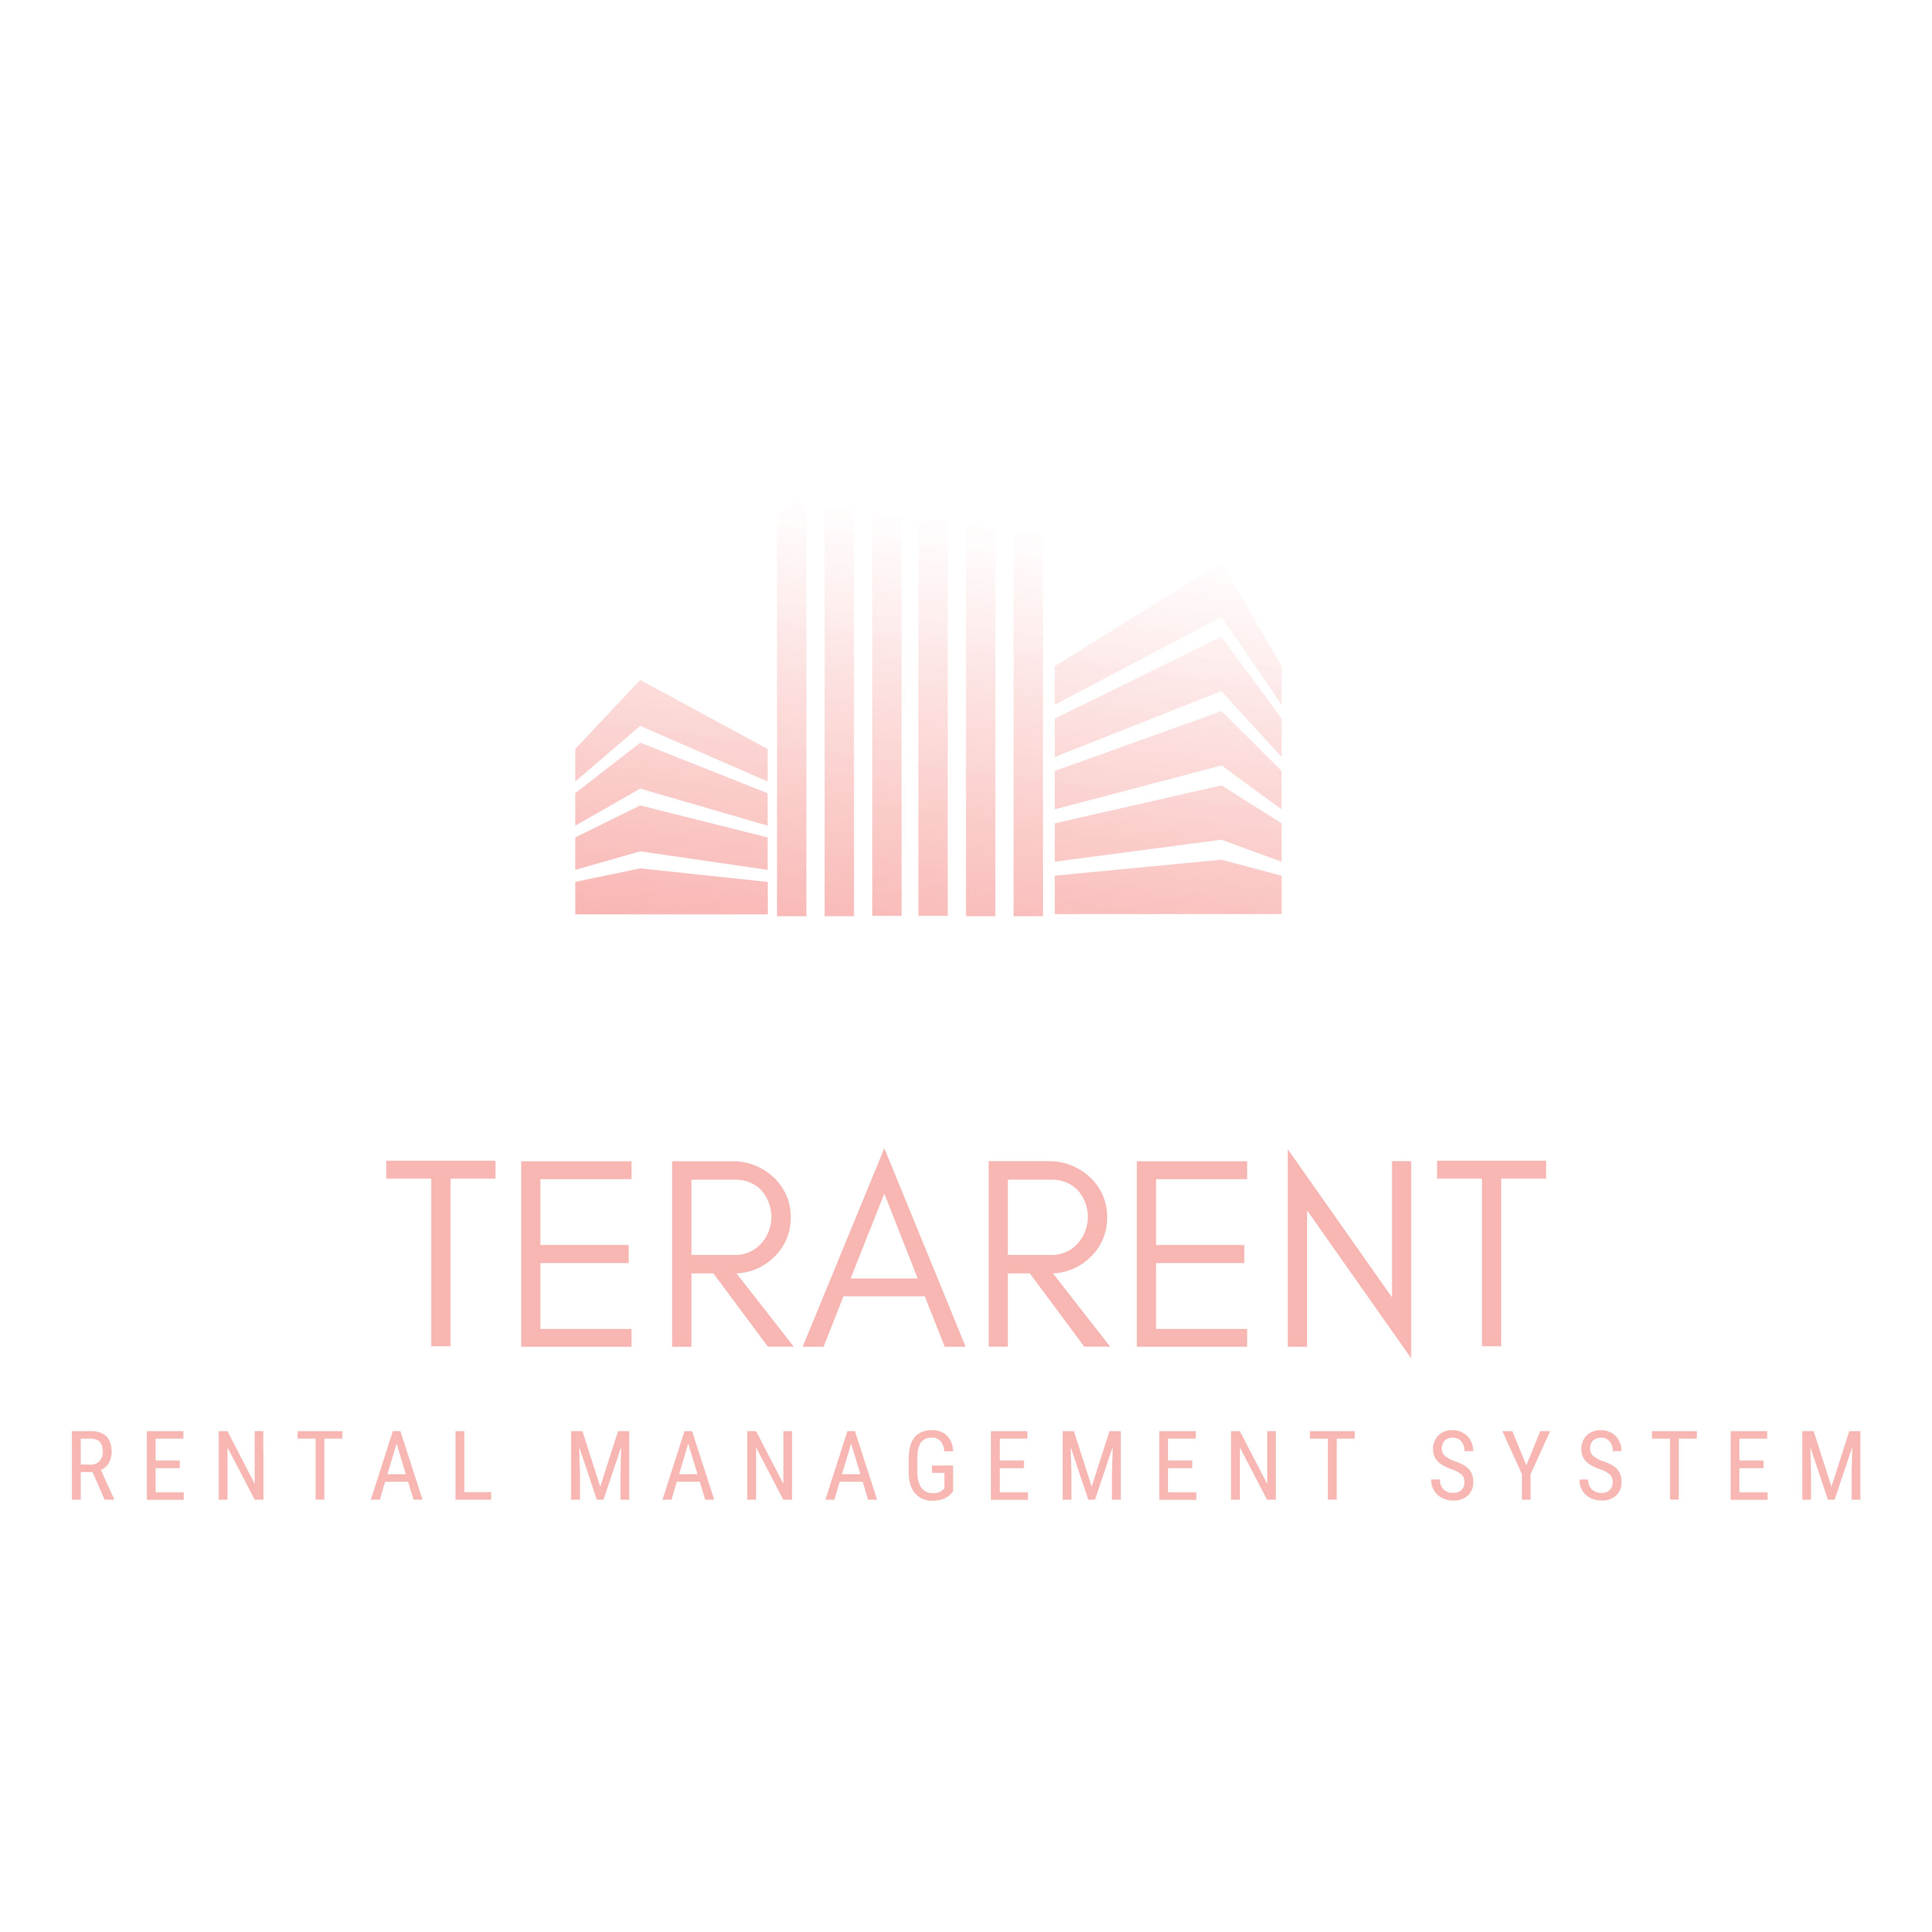 Terarent Real Estate Systems Inc.